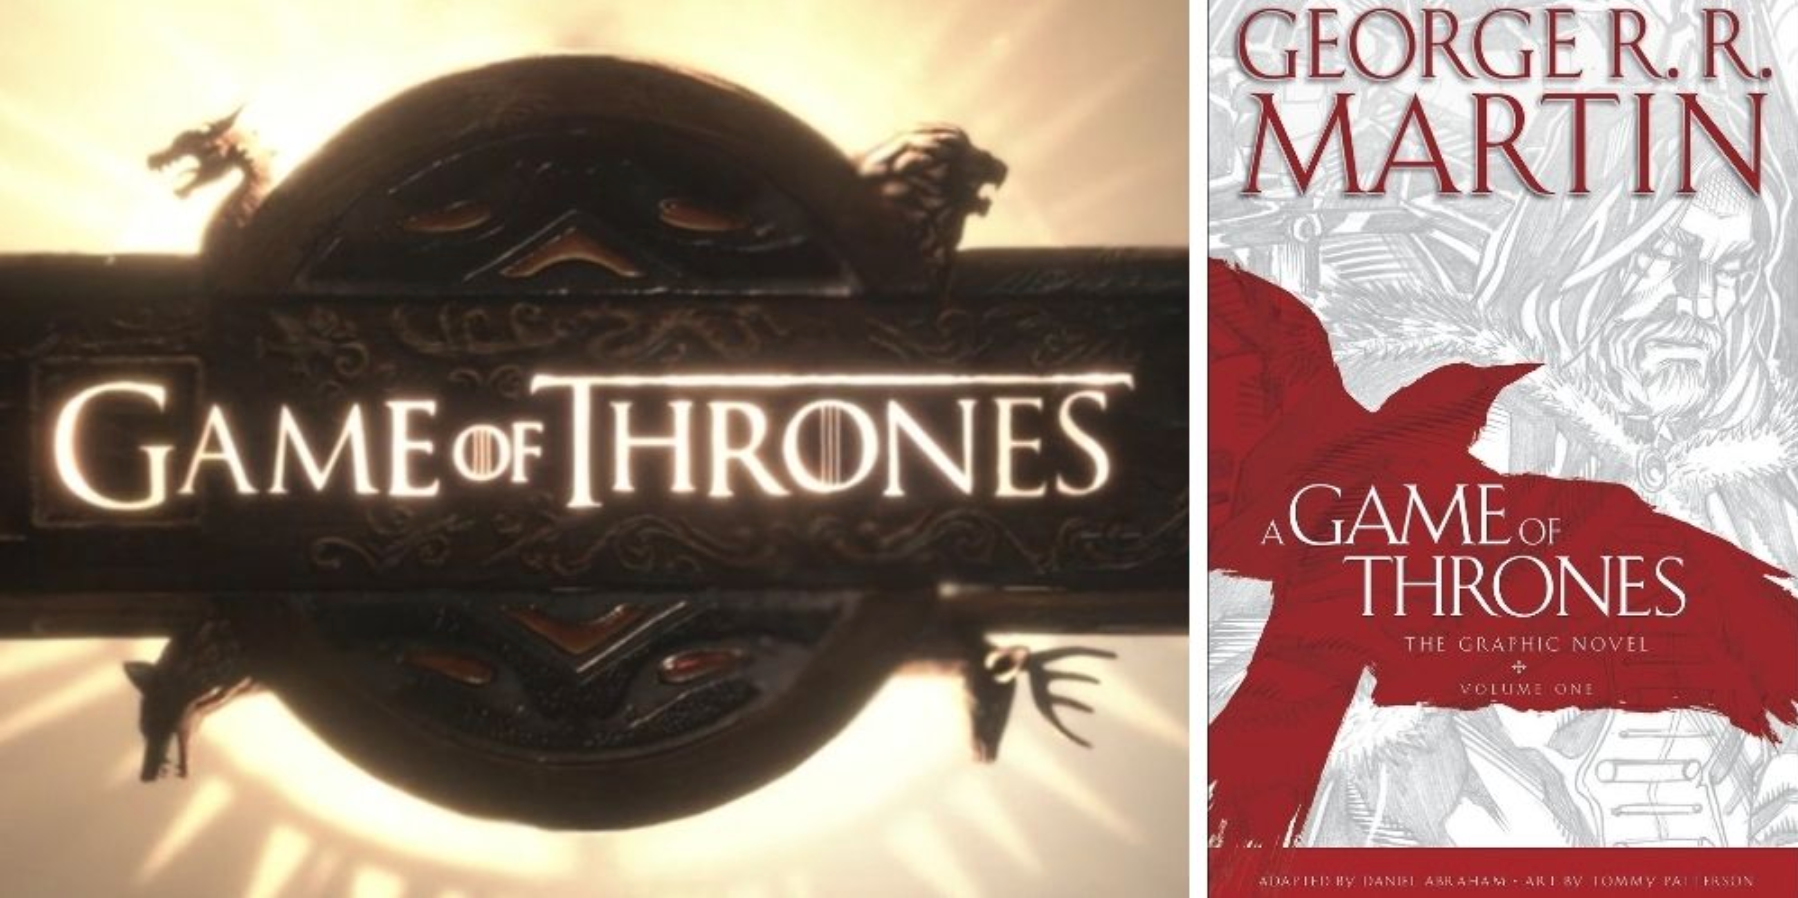 Game of Thrones Television Show Opening Graphic Novel Volume 1